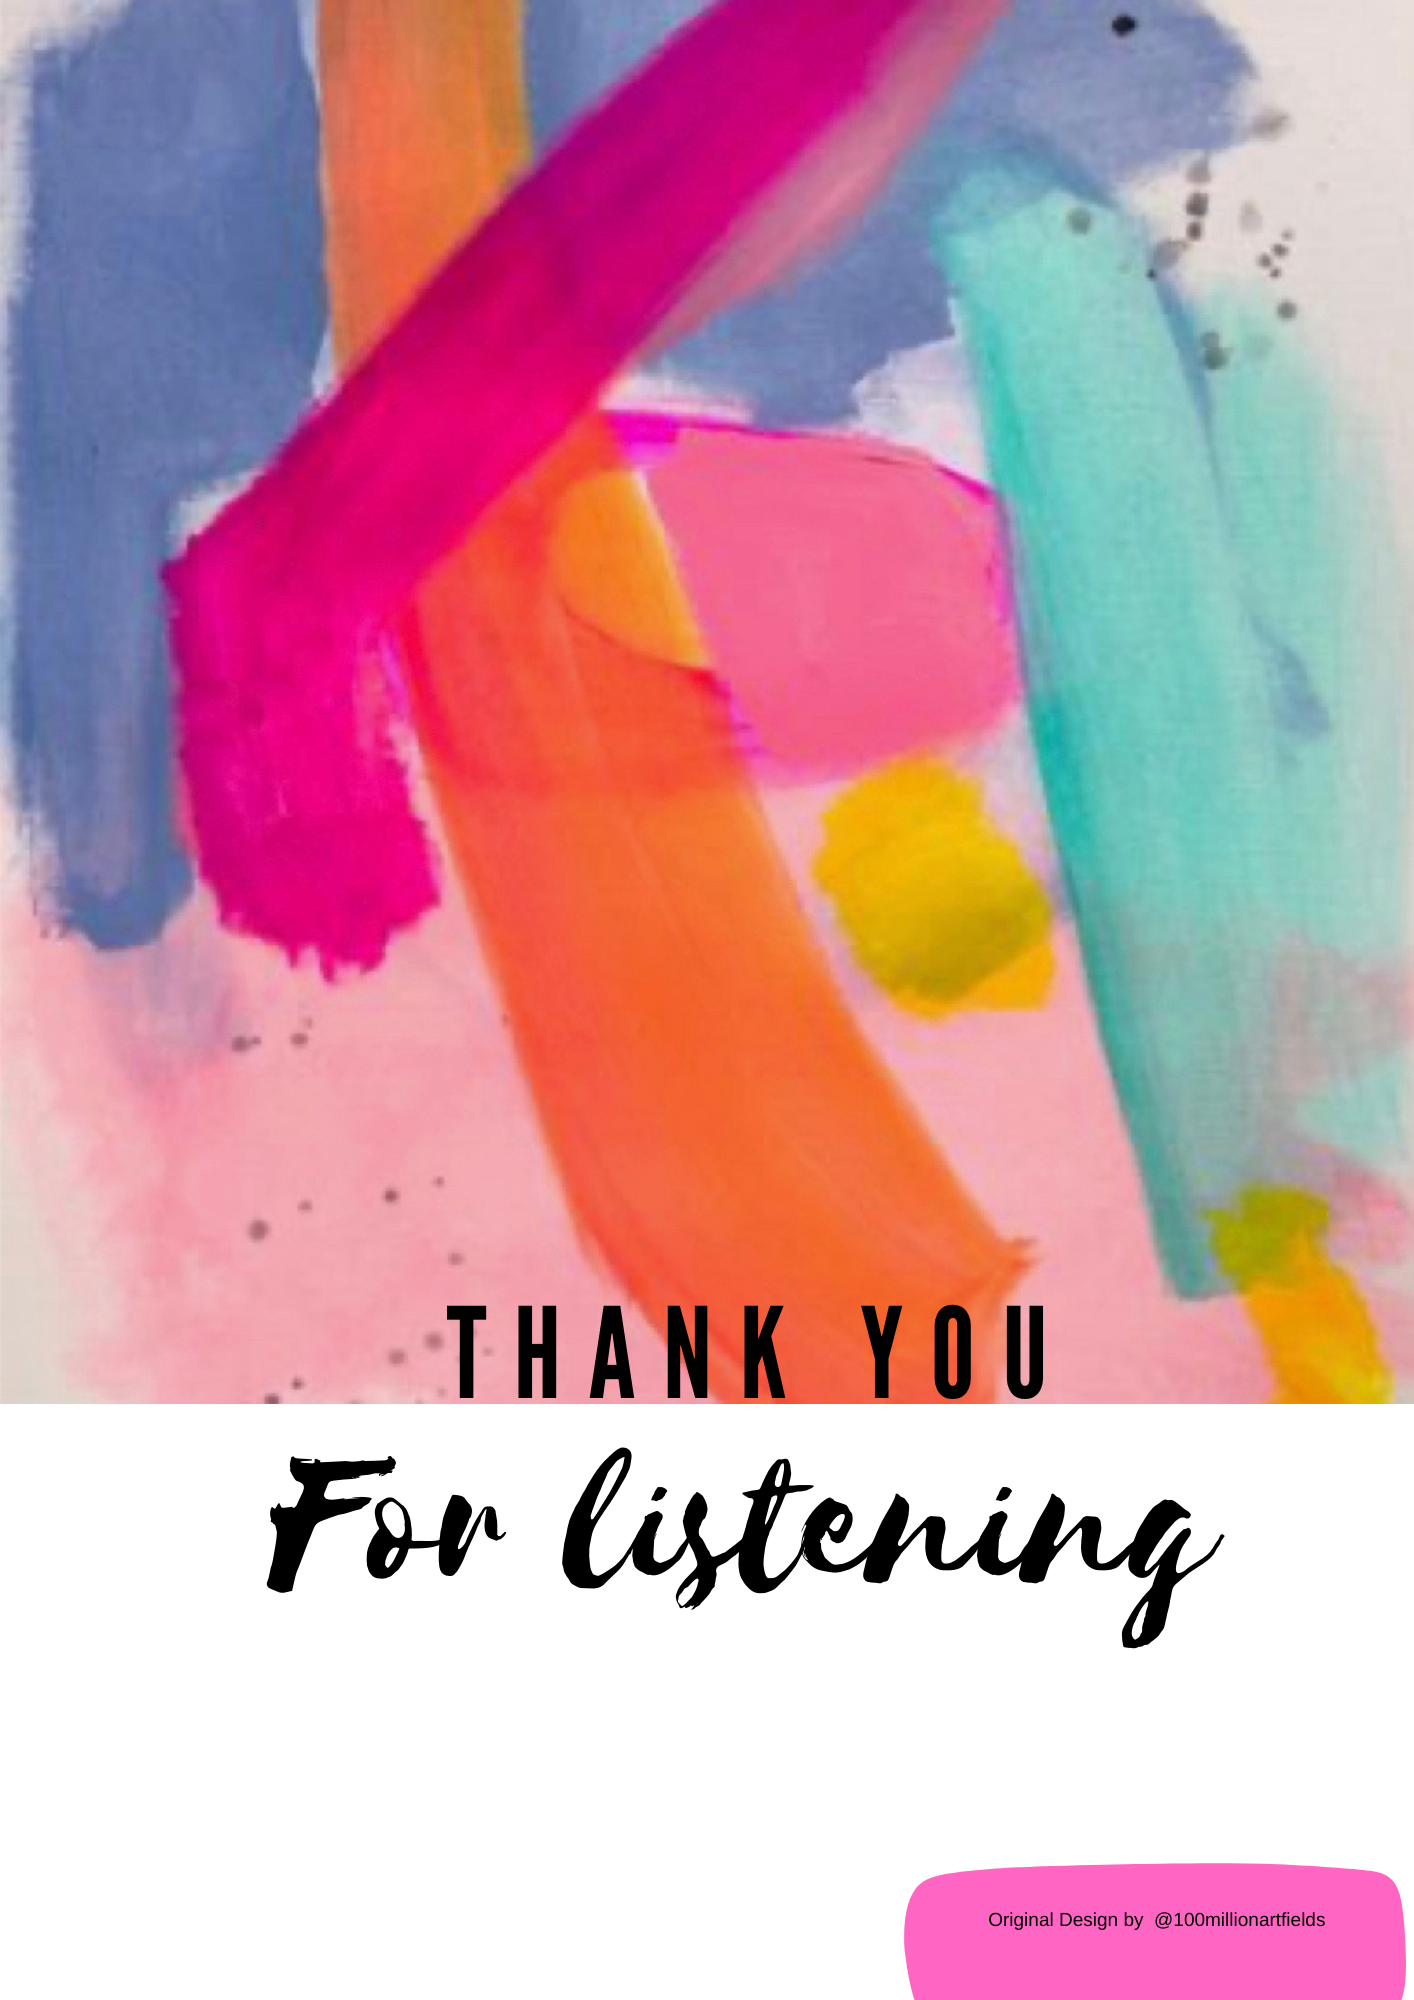 thank you for listening images